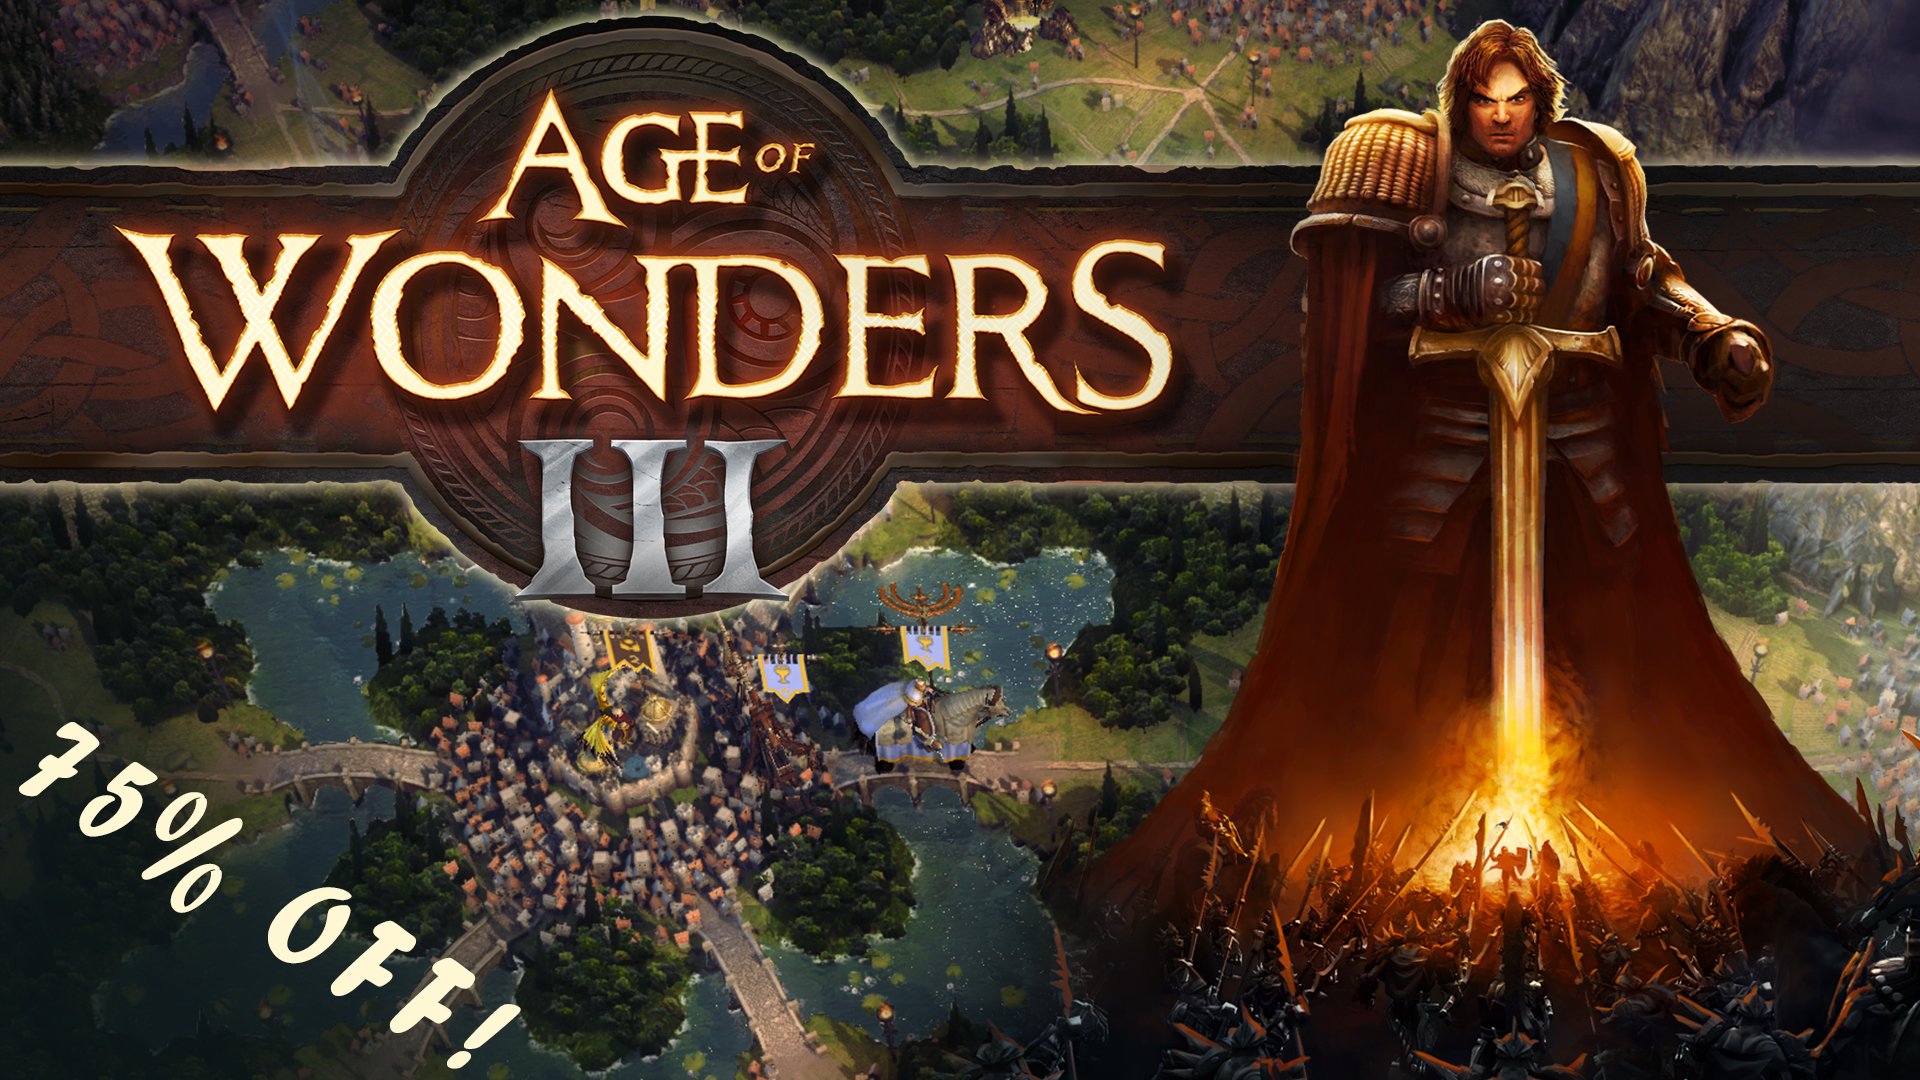 Paradox Interactive Have You Tried The Turn Based Fantasy Strategy Action That Is Age Of Wonders Iii If Not Then Here Is Your Chance As It S Currently 75 Off On Steam